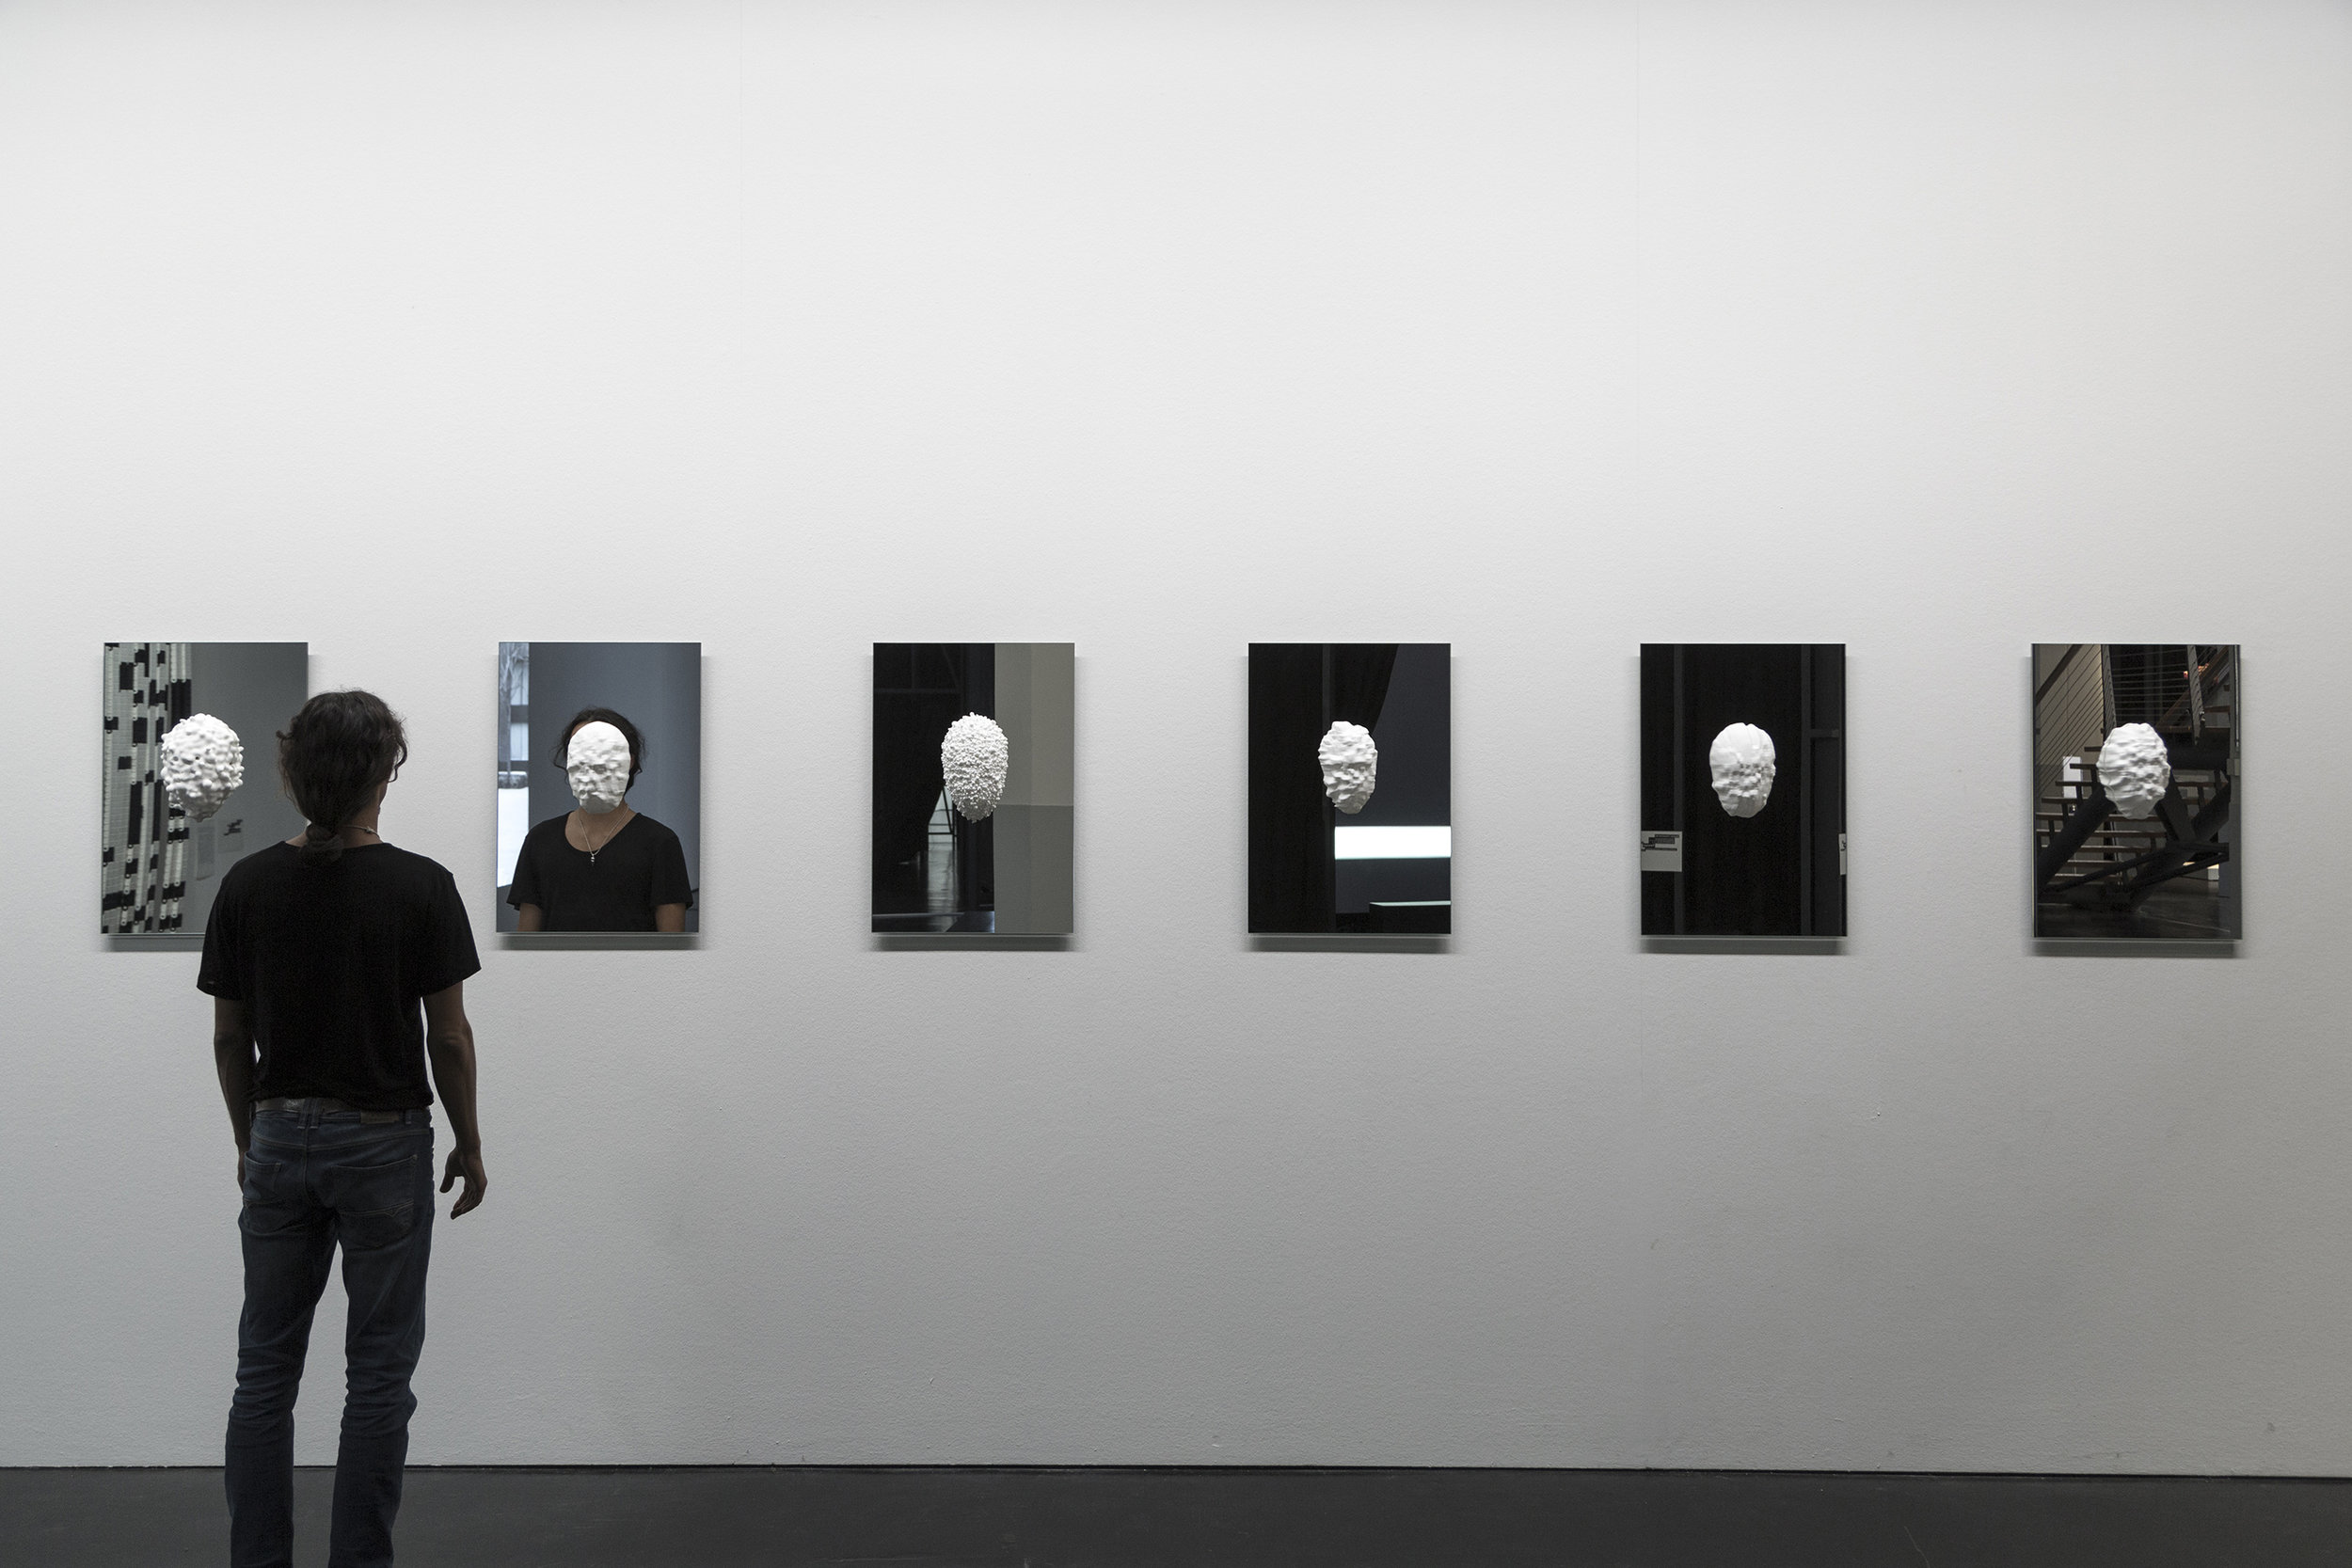   Sterling Crispin,   Data-Masks (Series) ,  2015 3D Printed Nylon, Mirror, Facial Recognition and Detection Algorithms, Genetic algorithms  18 x 26 inches | 45.7 x 66 cm each  || Installation View — ZKM Karlsruhe Museum || 